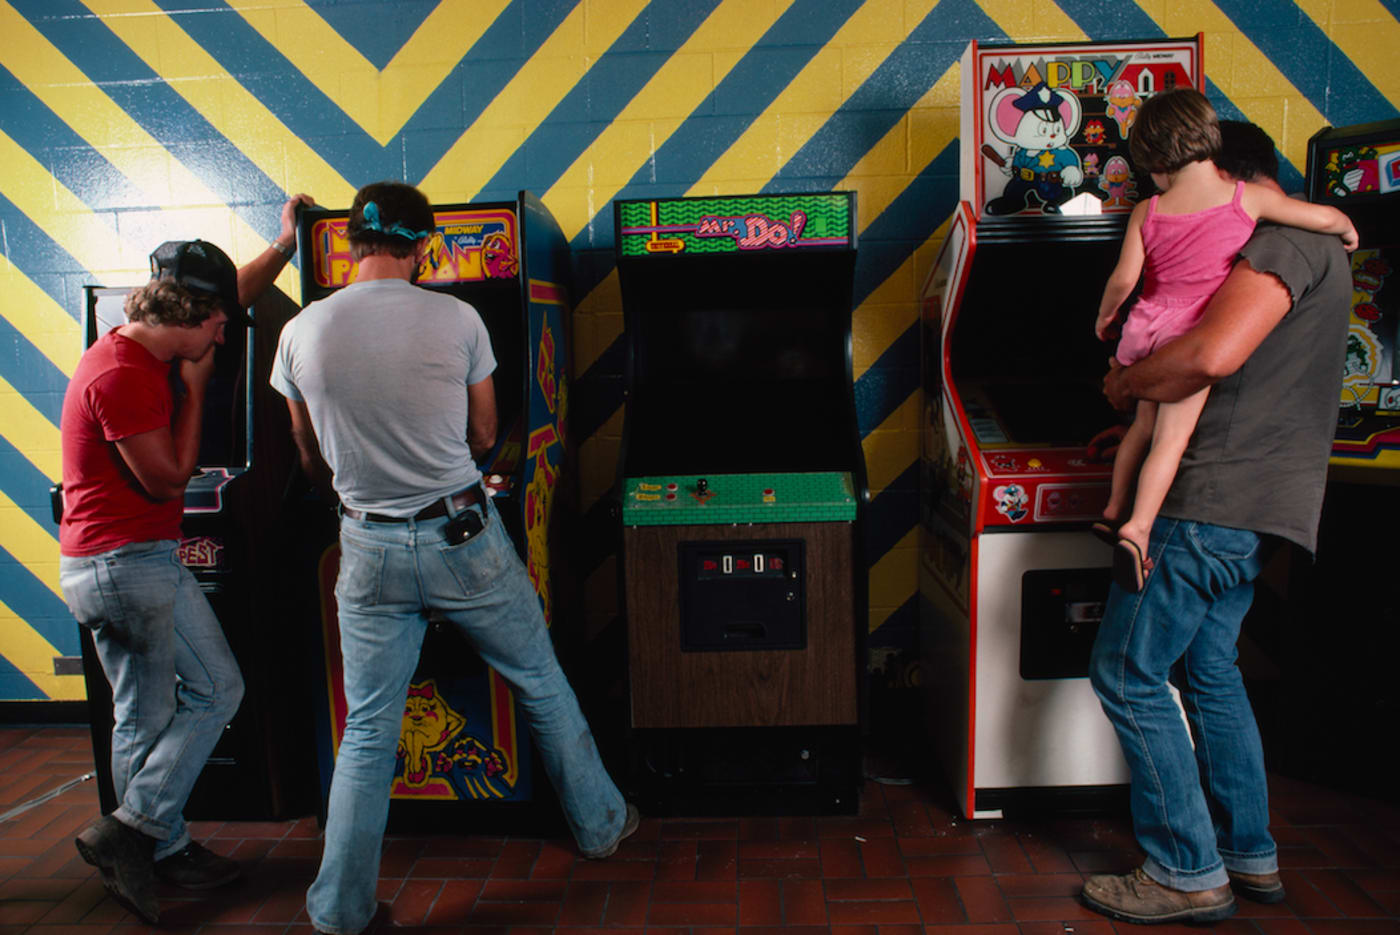 Top 10 Arcade Machines Of All Time - BEST GAMES WALKTHROUGH